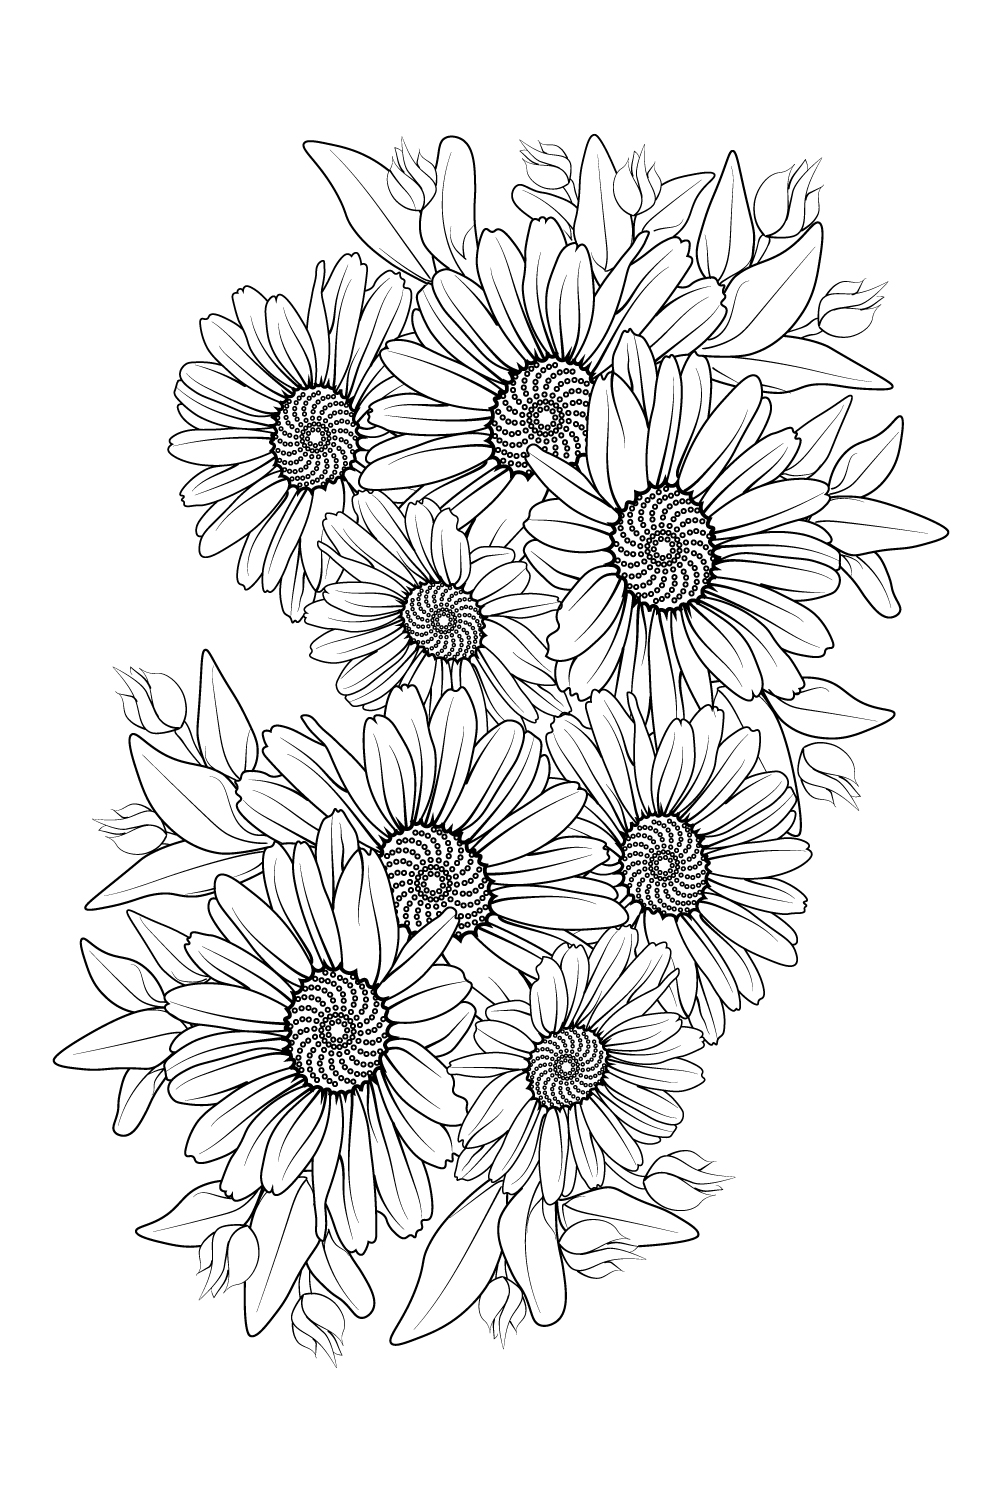 Daisy flower coloring pages, daisy flower bouquet tattoo, small daisy tattoo, pinterest preview image.